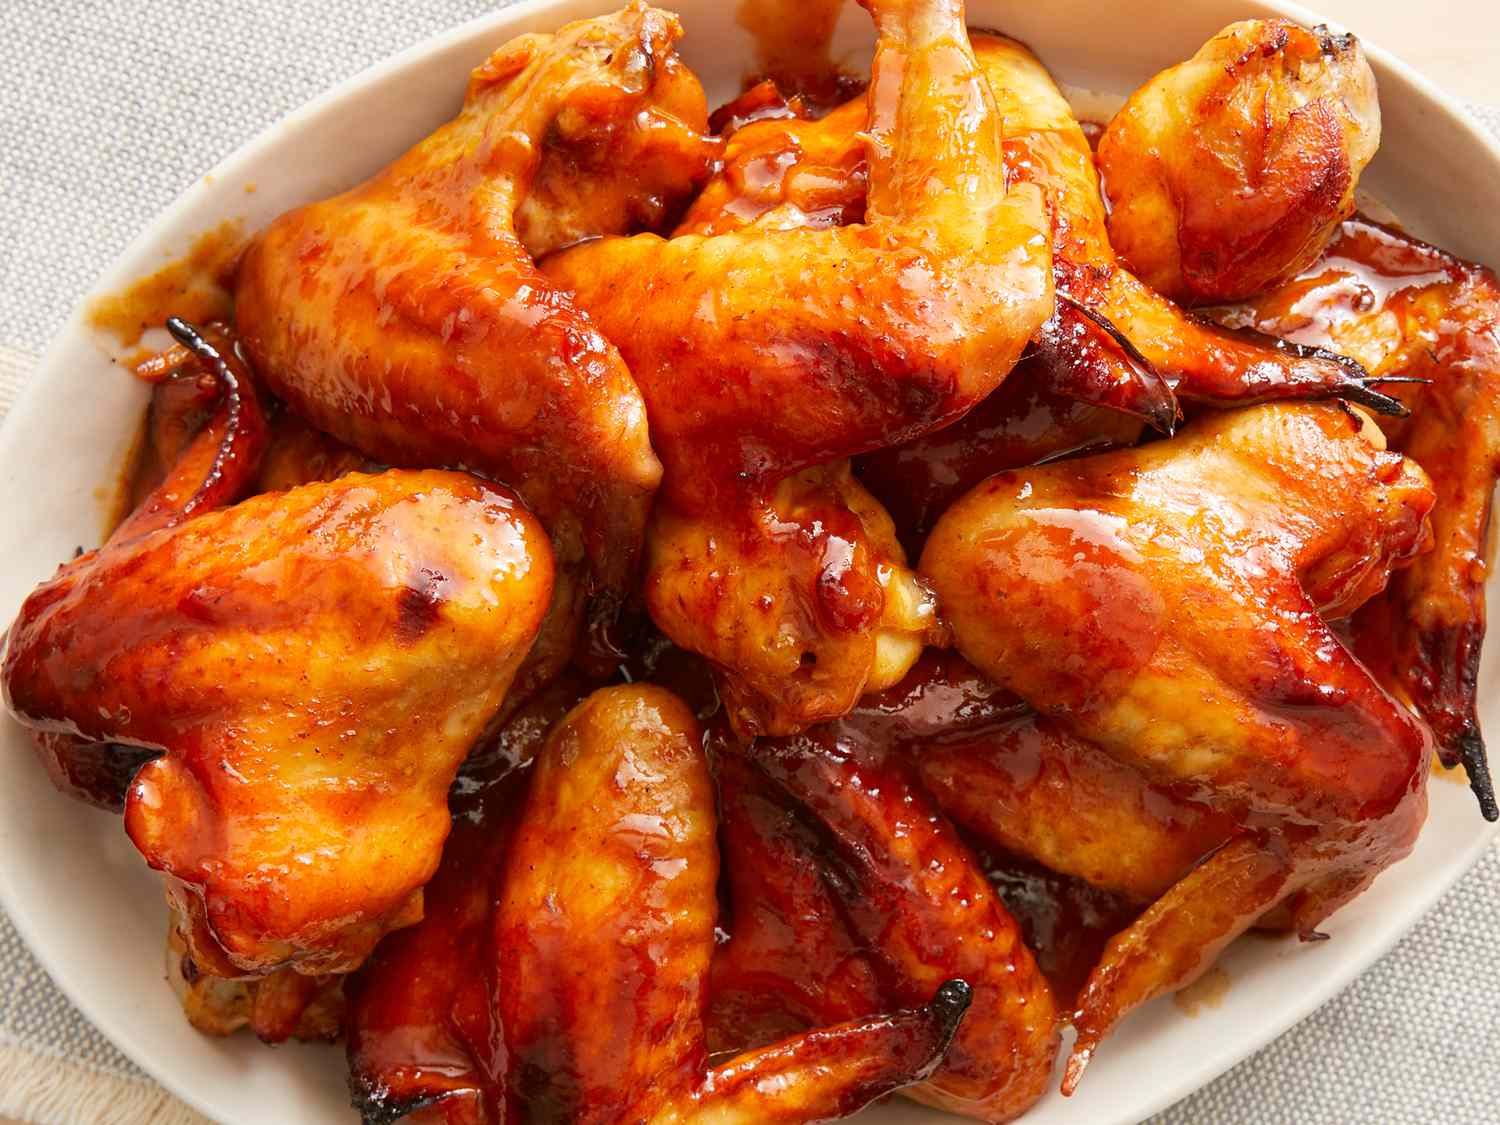 Overhead looking down at a shallow bowl full of bbq chicken wings